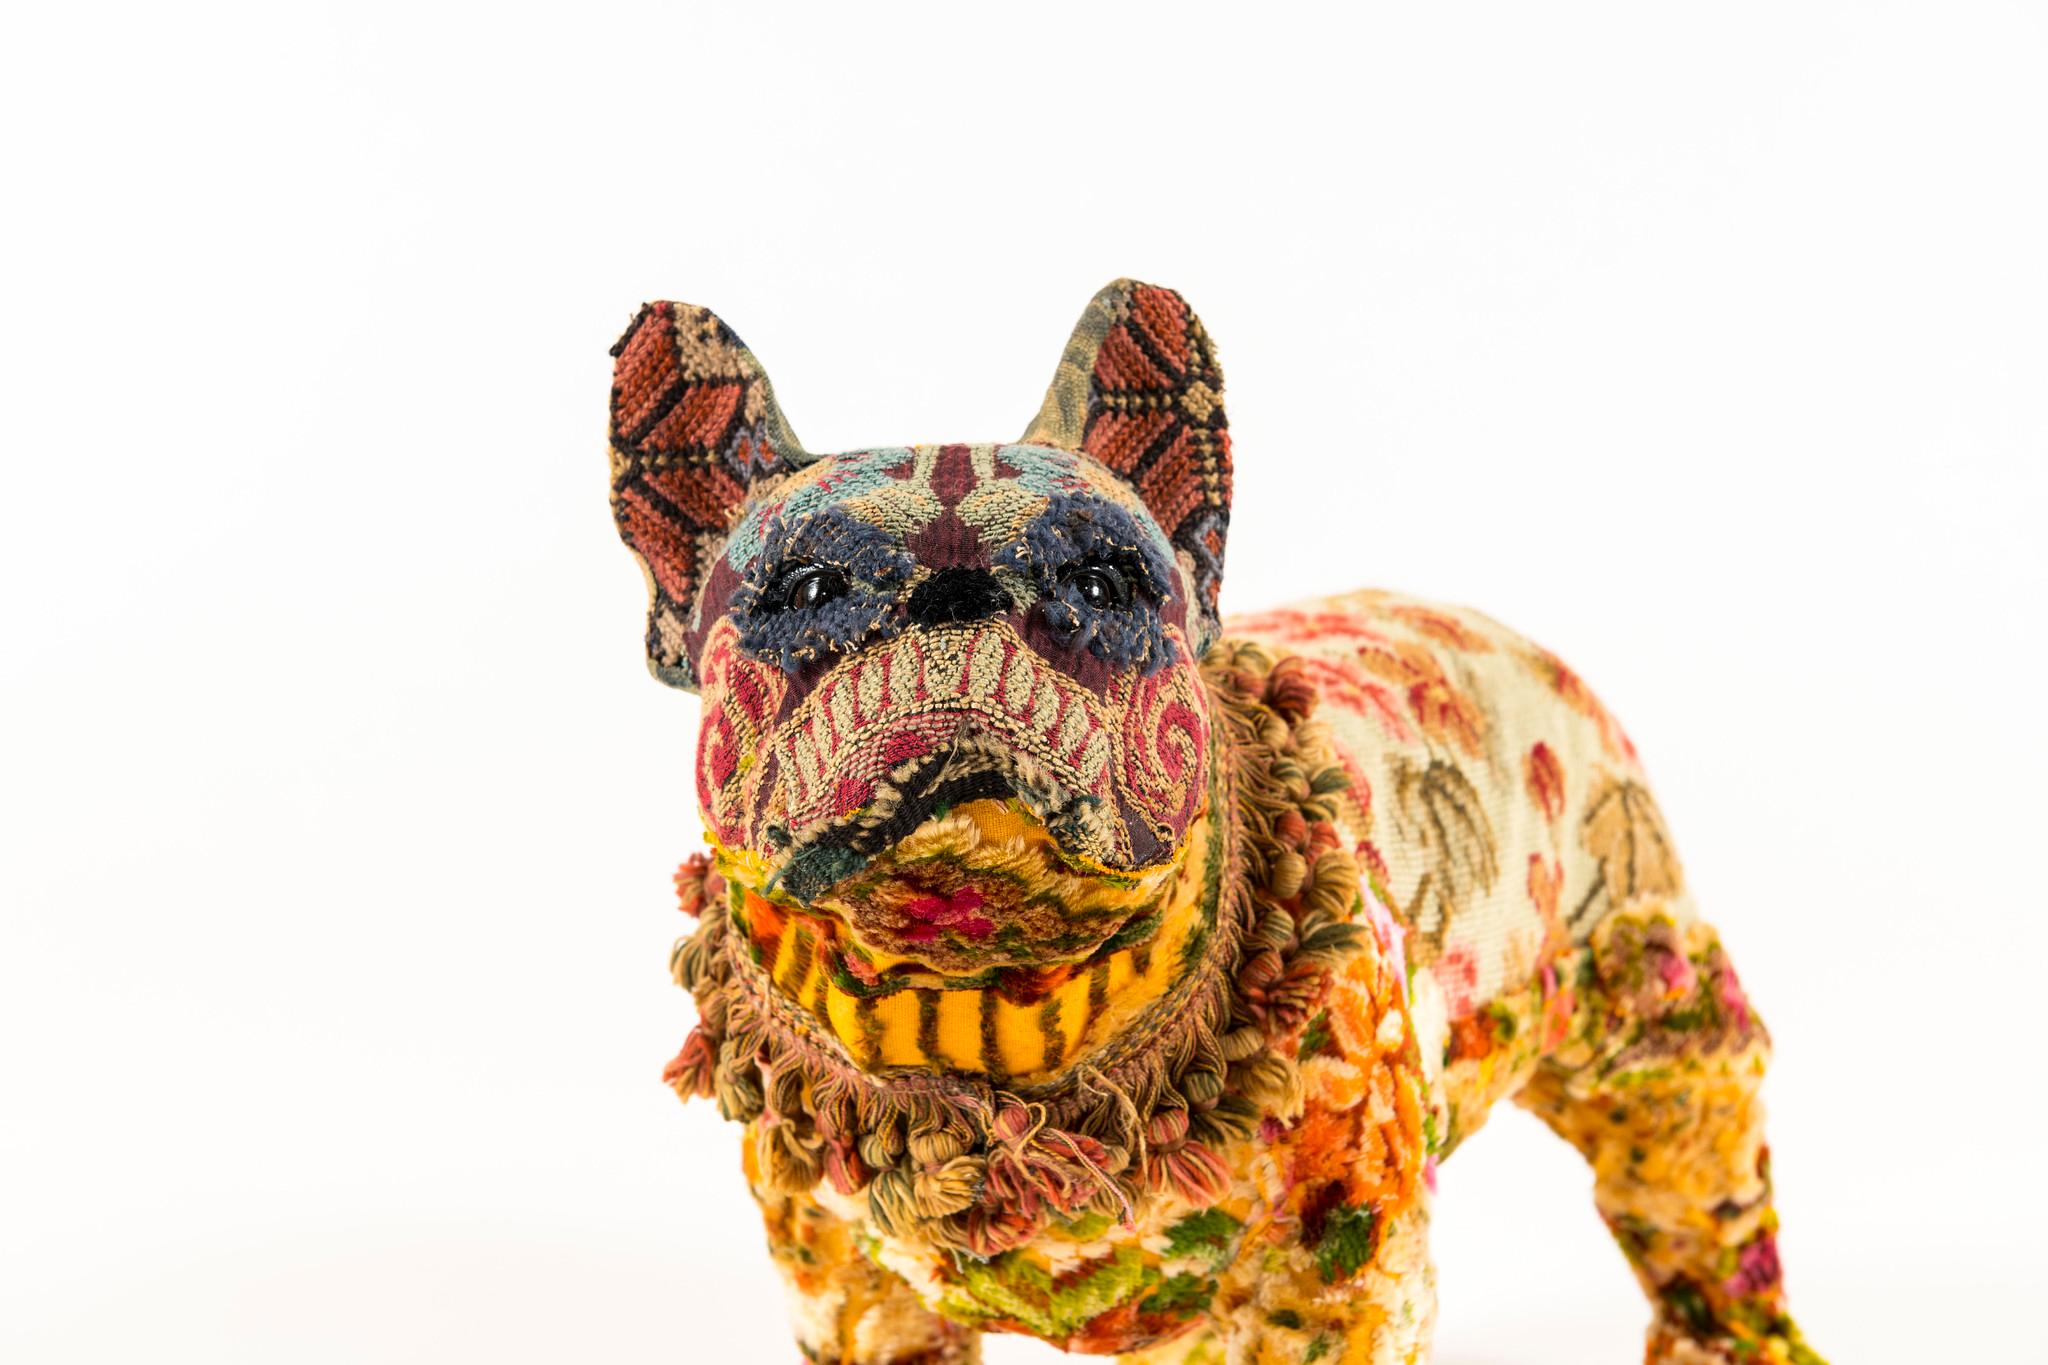 Maxie is flower embellished bull dog with a mix of bright textiles to include: 1940s floral needlepoint body; vintage cut chenille on underbody neck, and legs; vintage embroidery from costume on Maxie's face; antique fringe trim collar and face